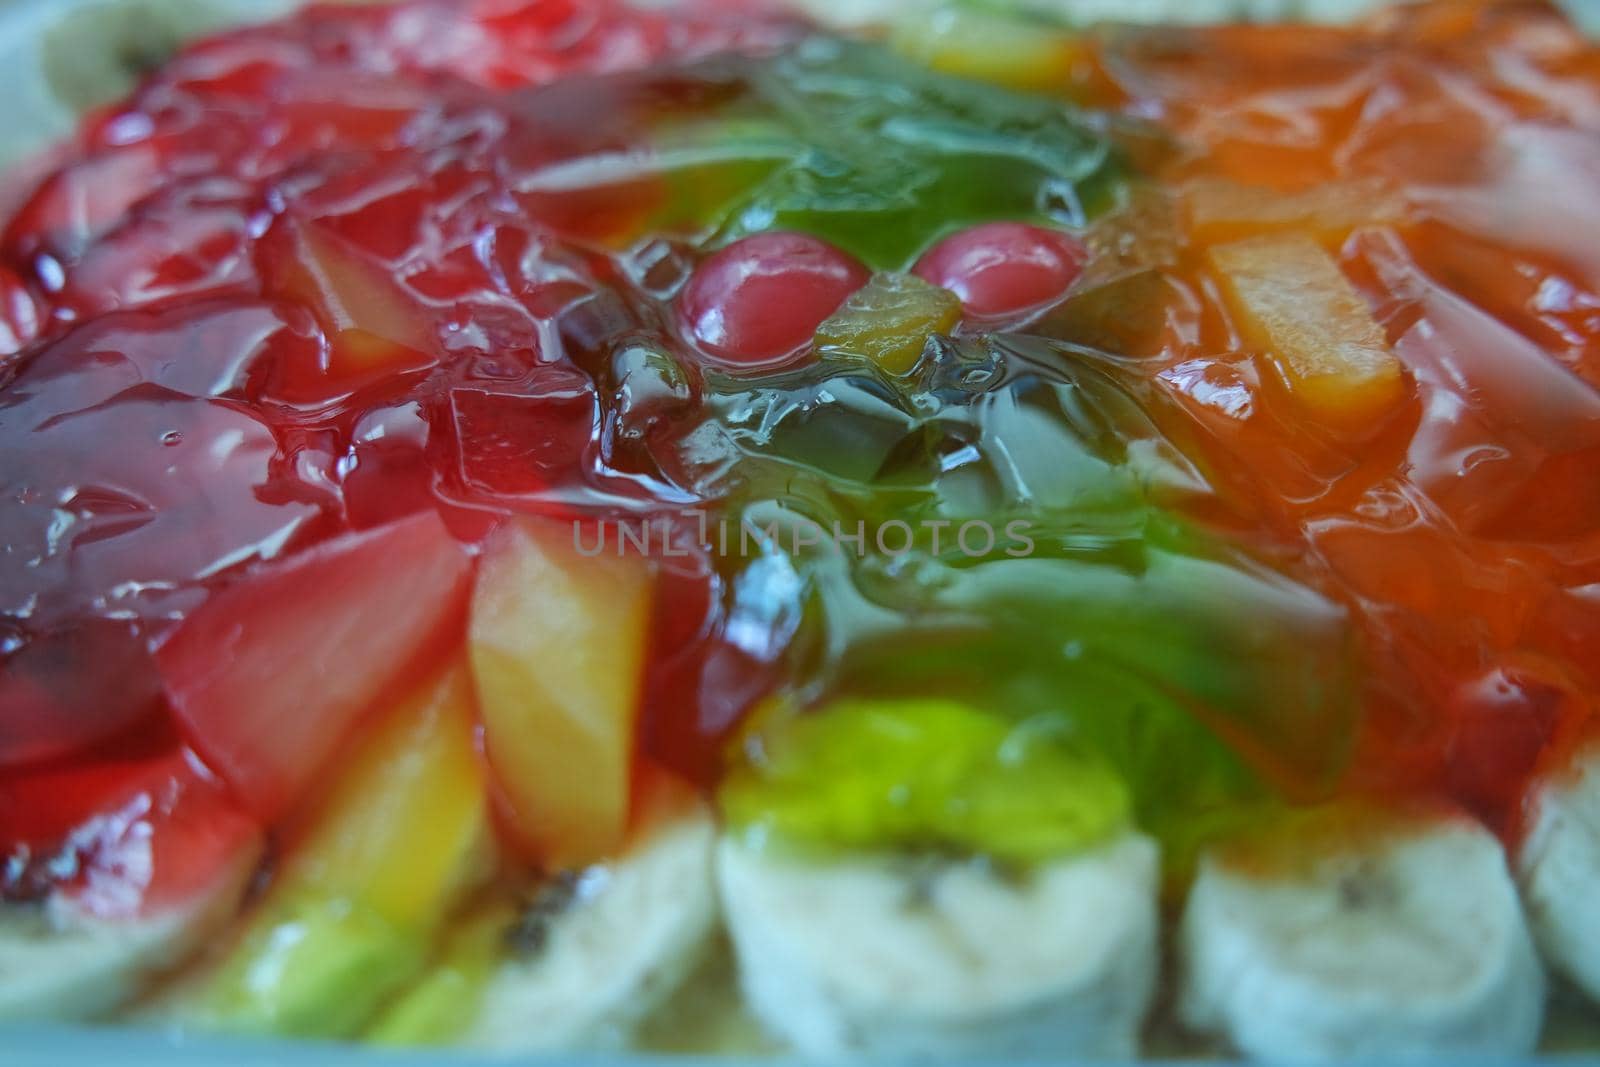 Creamy custard jelly sweet dish with different slices layered on surface by Photochowk